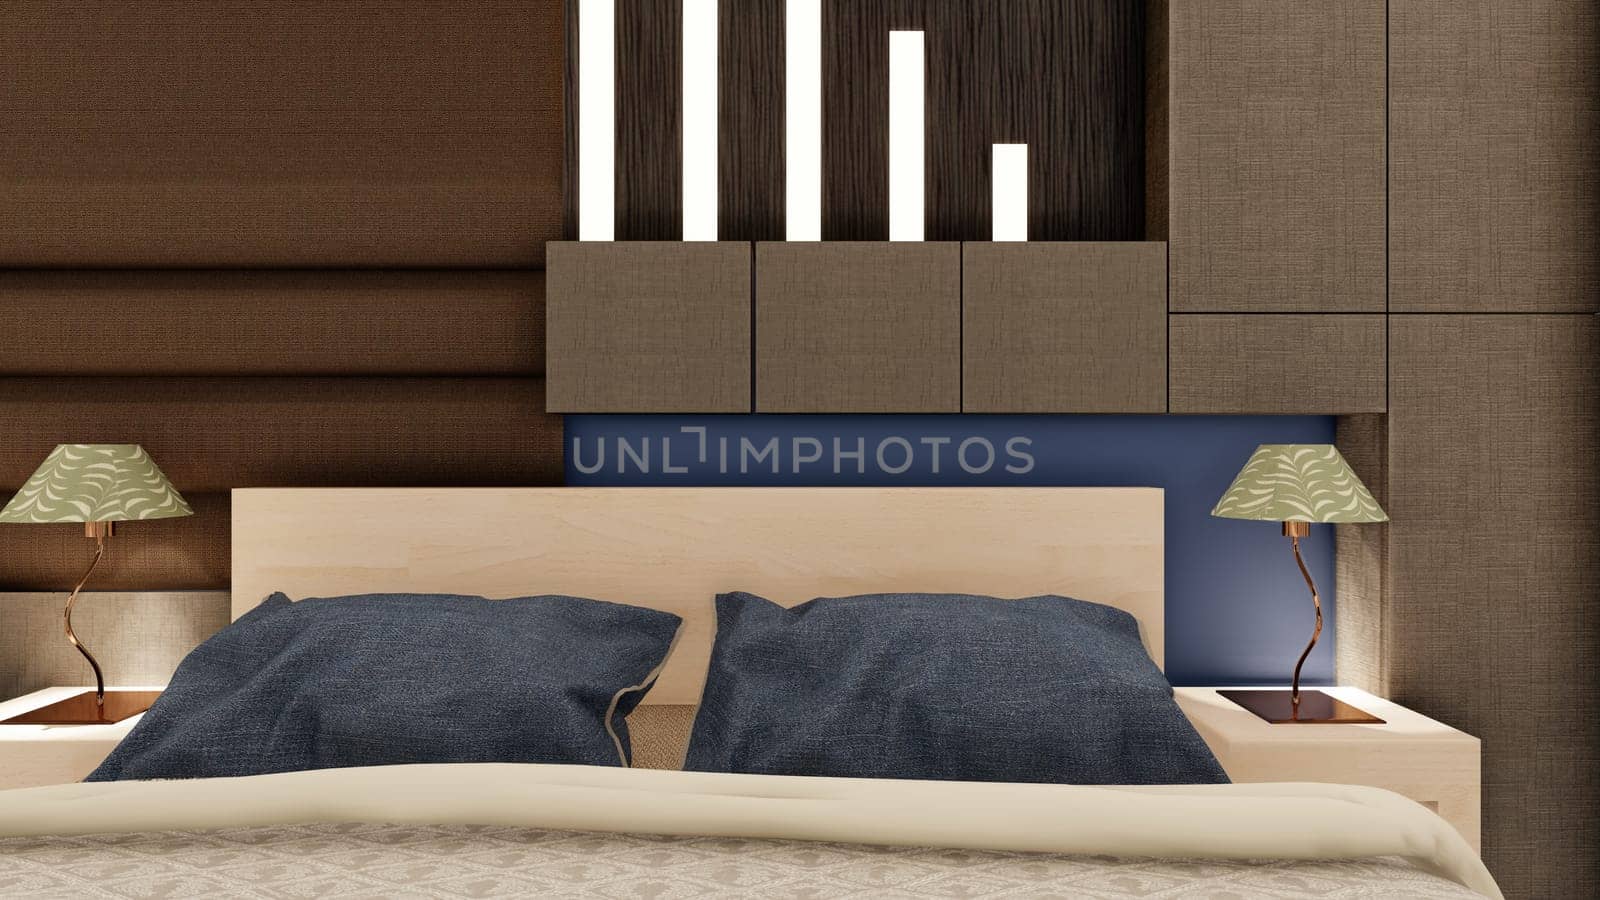 Realistic dark brown luxury bedroom interior with wooden furniture 3d rendering by shawlinmohd